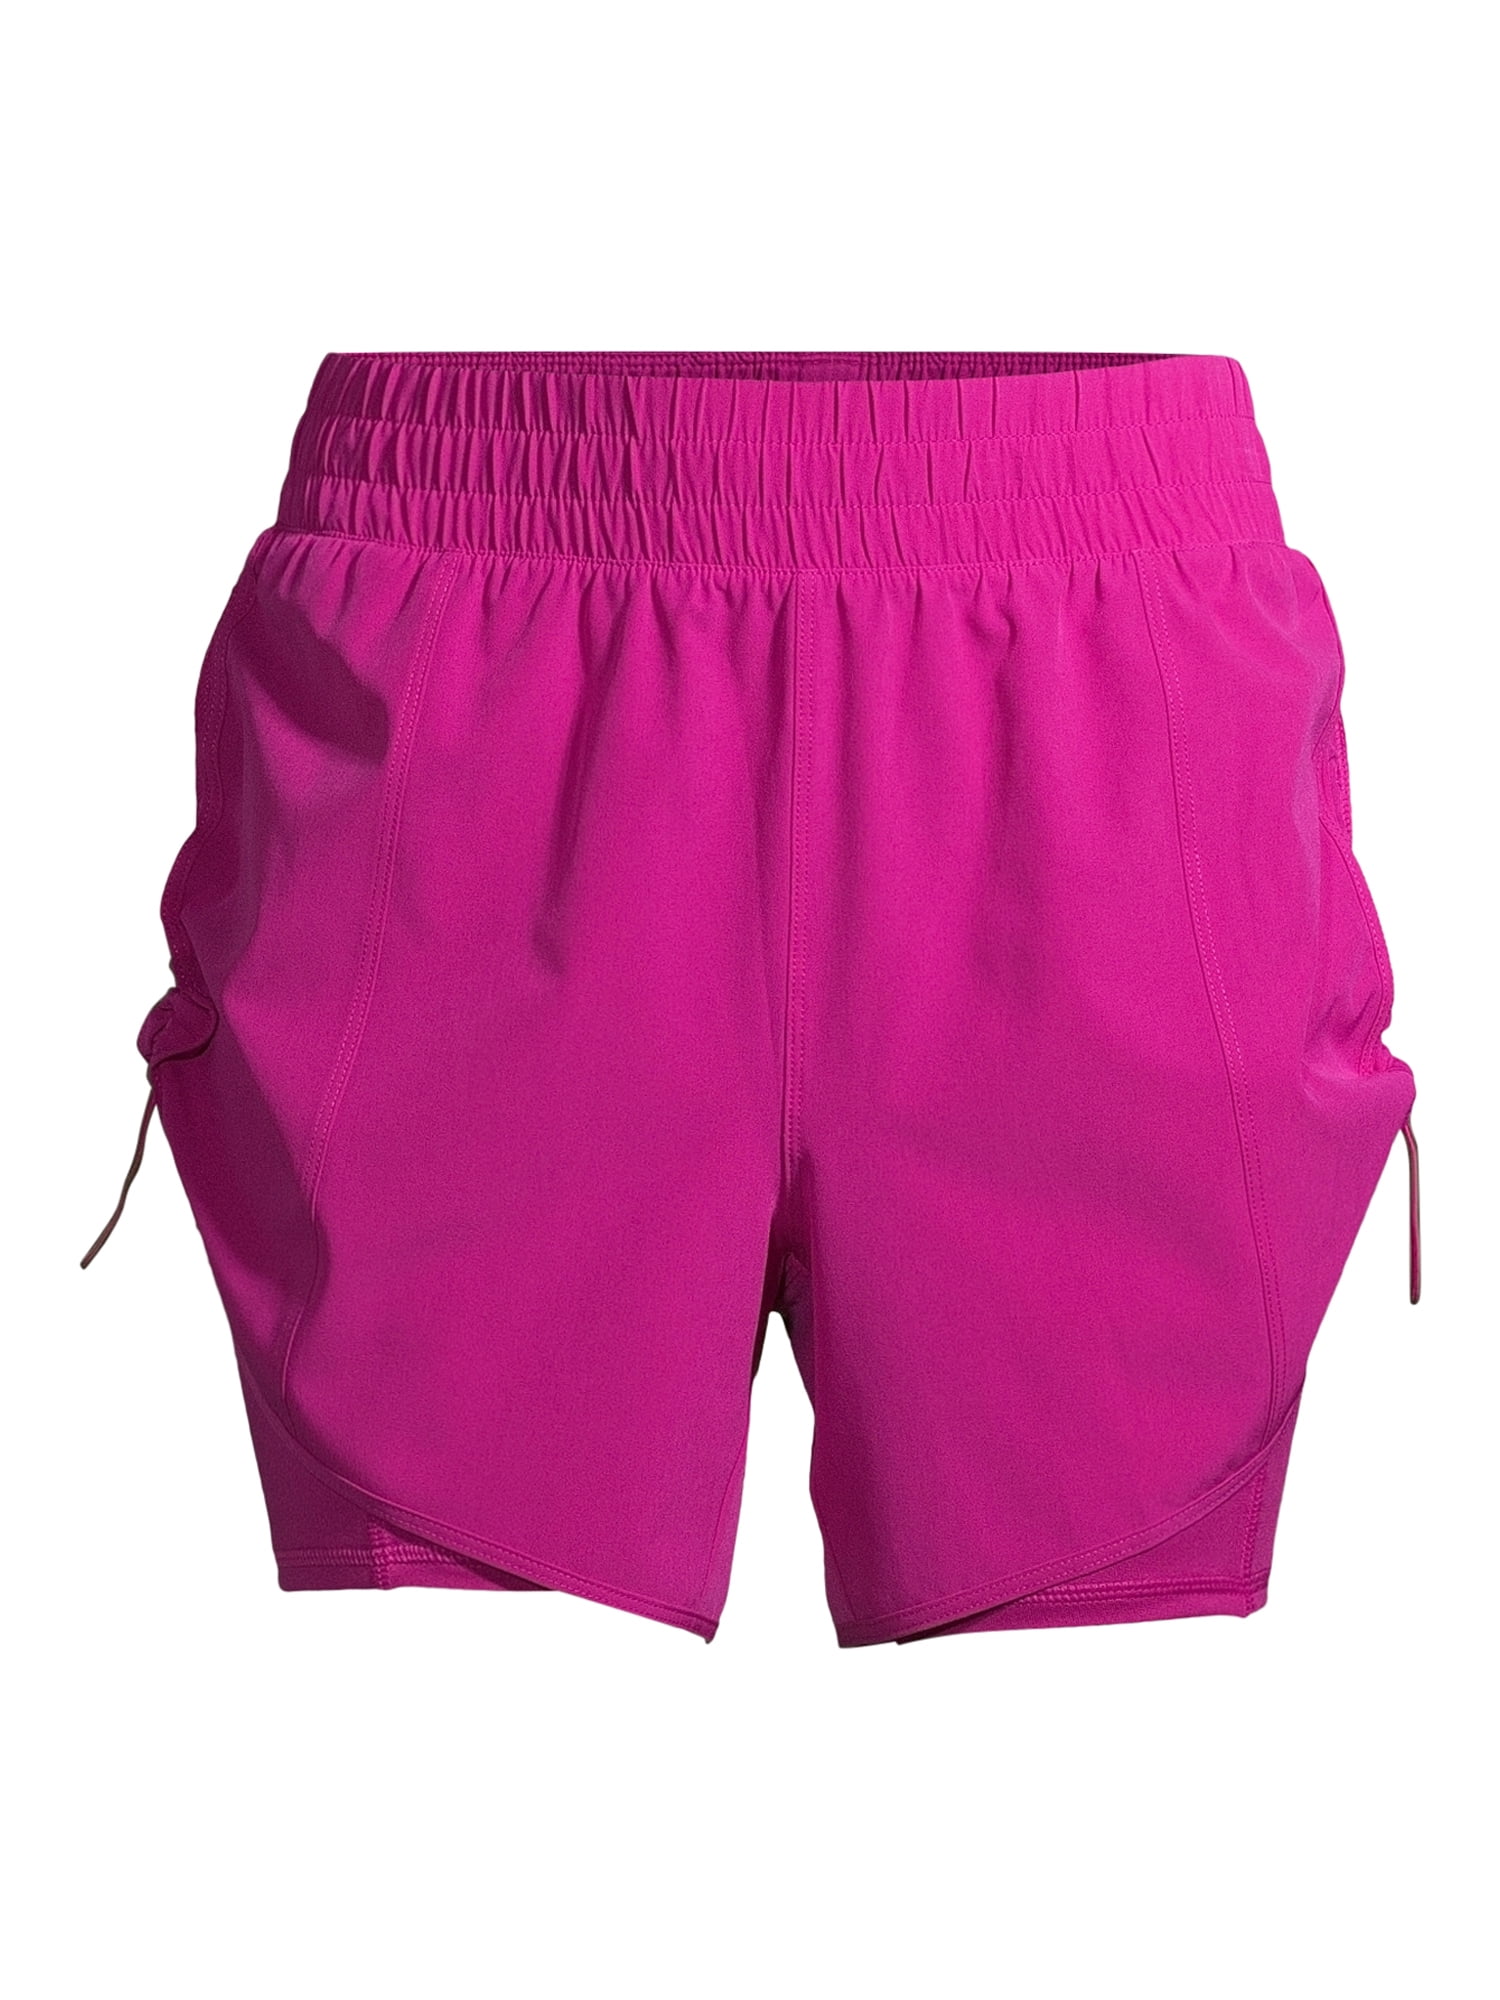 Avia Women's Running Shorts with Side Bungees and Bike Liner 